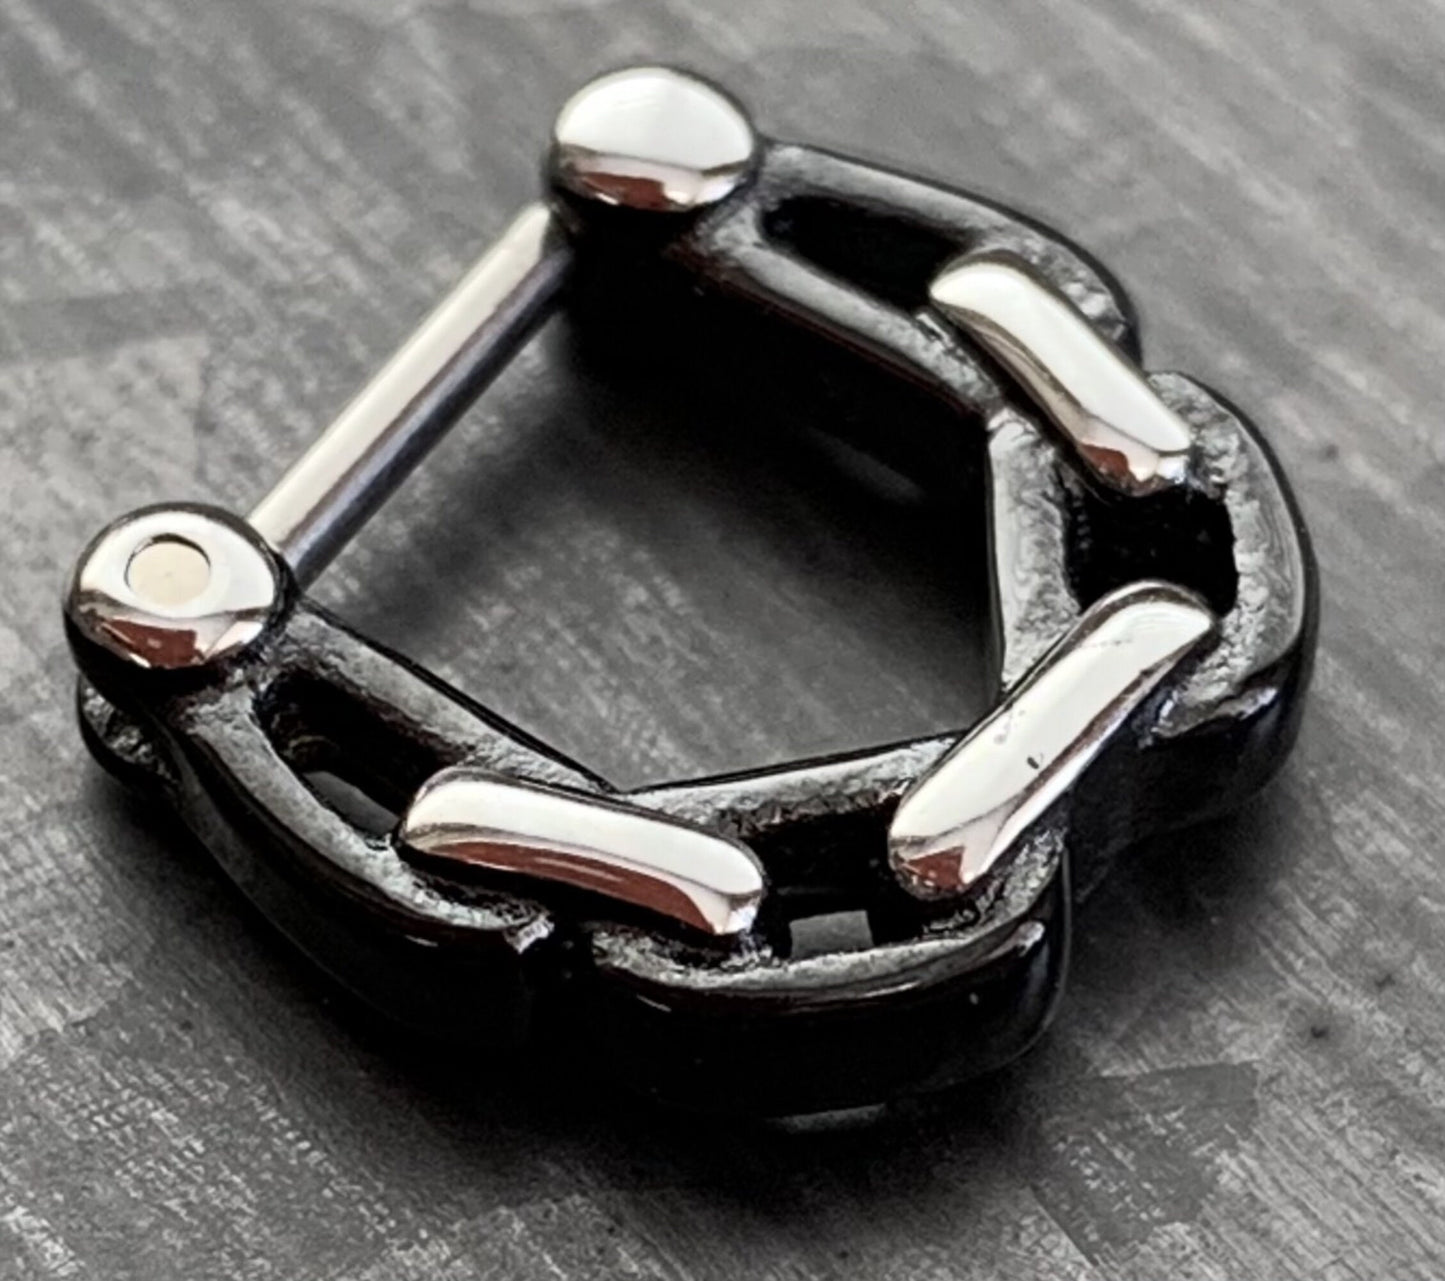 1 Piece Unique Linked Chain 100% Surgical Steel Septum Clicker Nose Ring - 16g or 14g - Steel, Gold and Black Available!